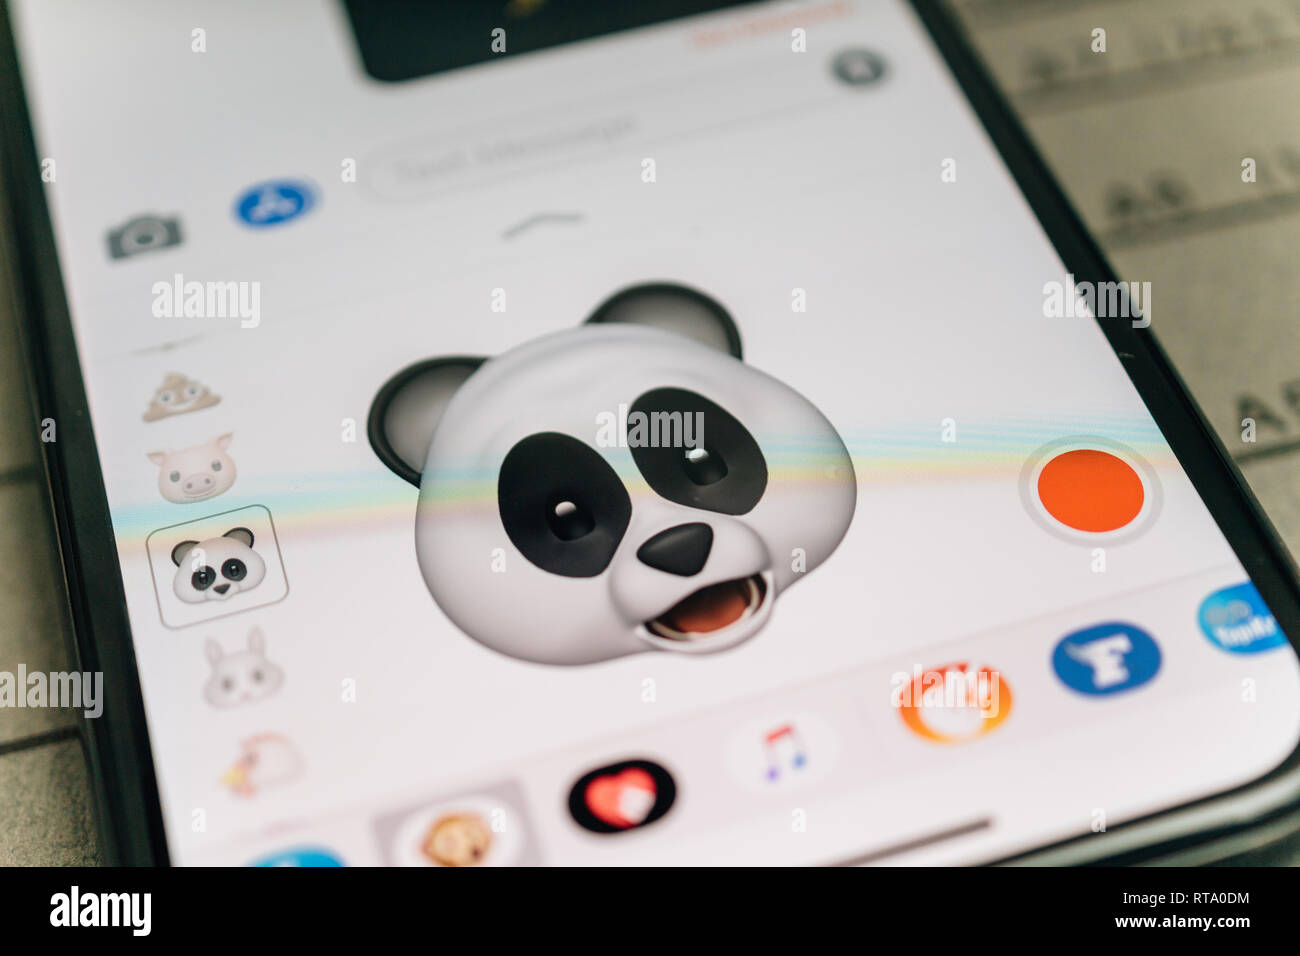 PARIS, FRANCE - NOV 9 2017: Panda bear 3d animoji emoji generated by Face ID facial recognition system with astonished face emotion close-up of the new iphone X 10 Display - tilt-shift lens used  Stock Photo